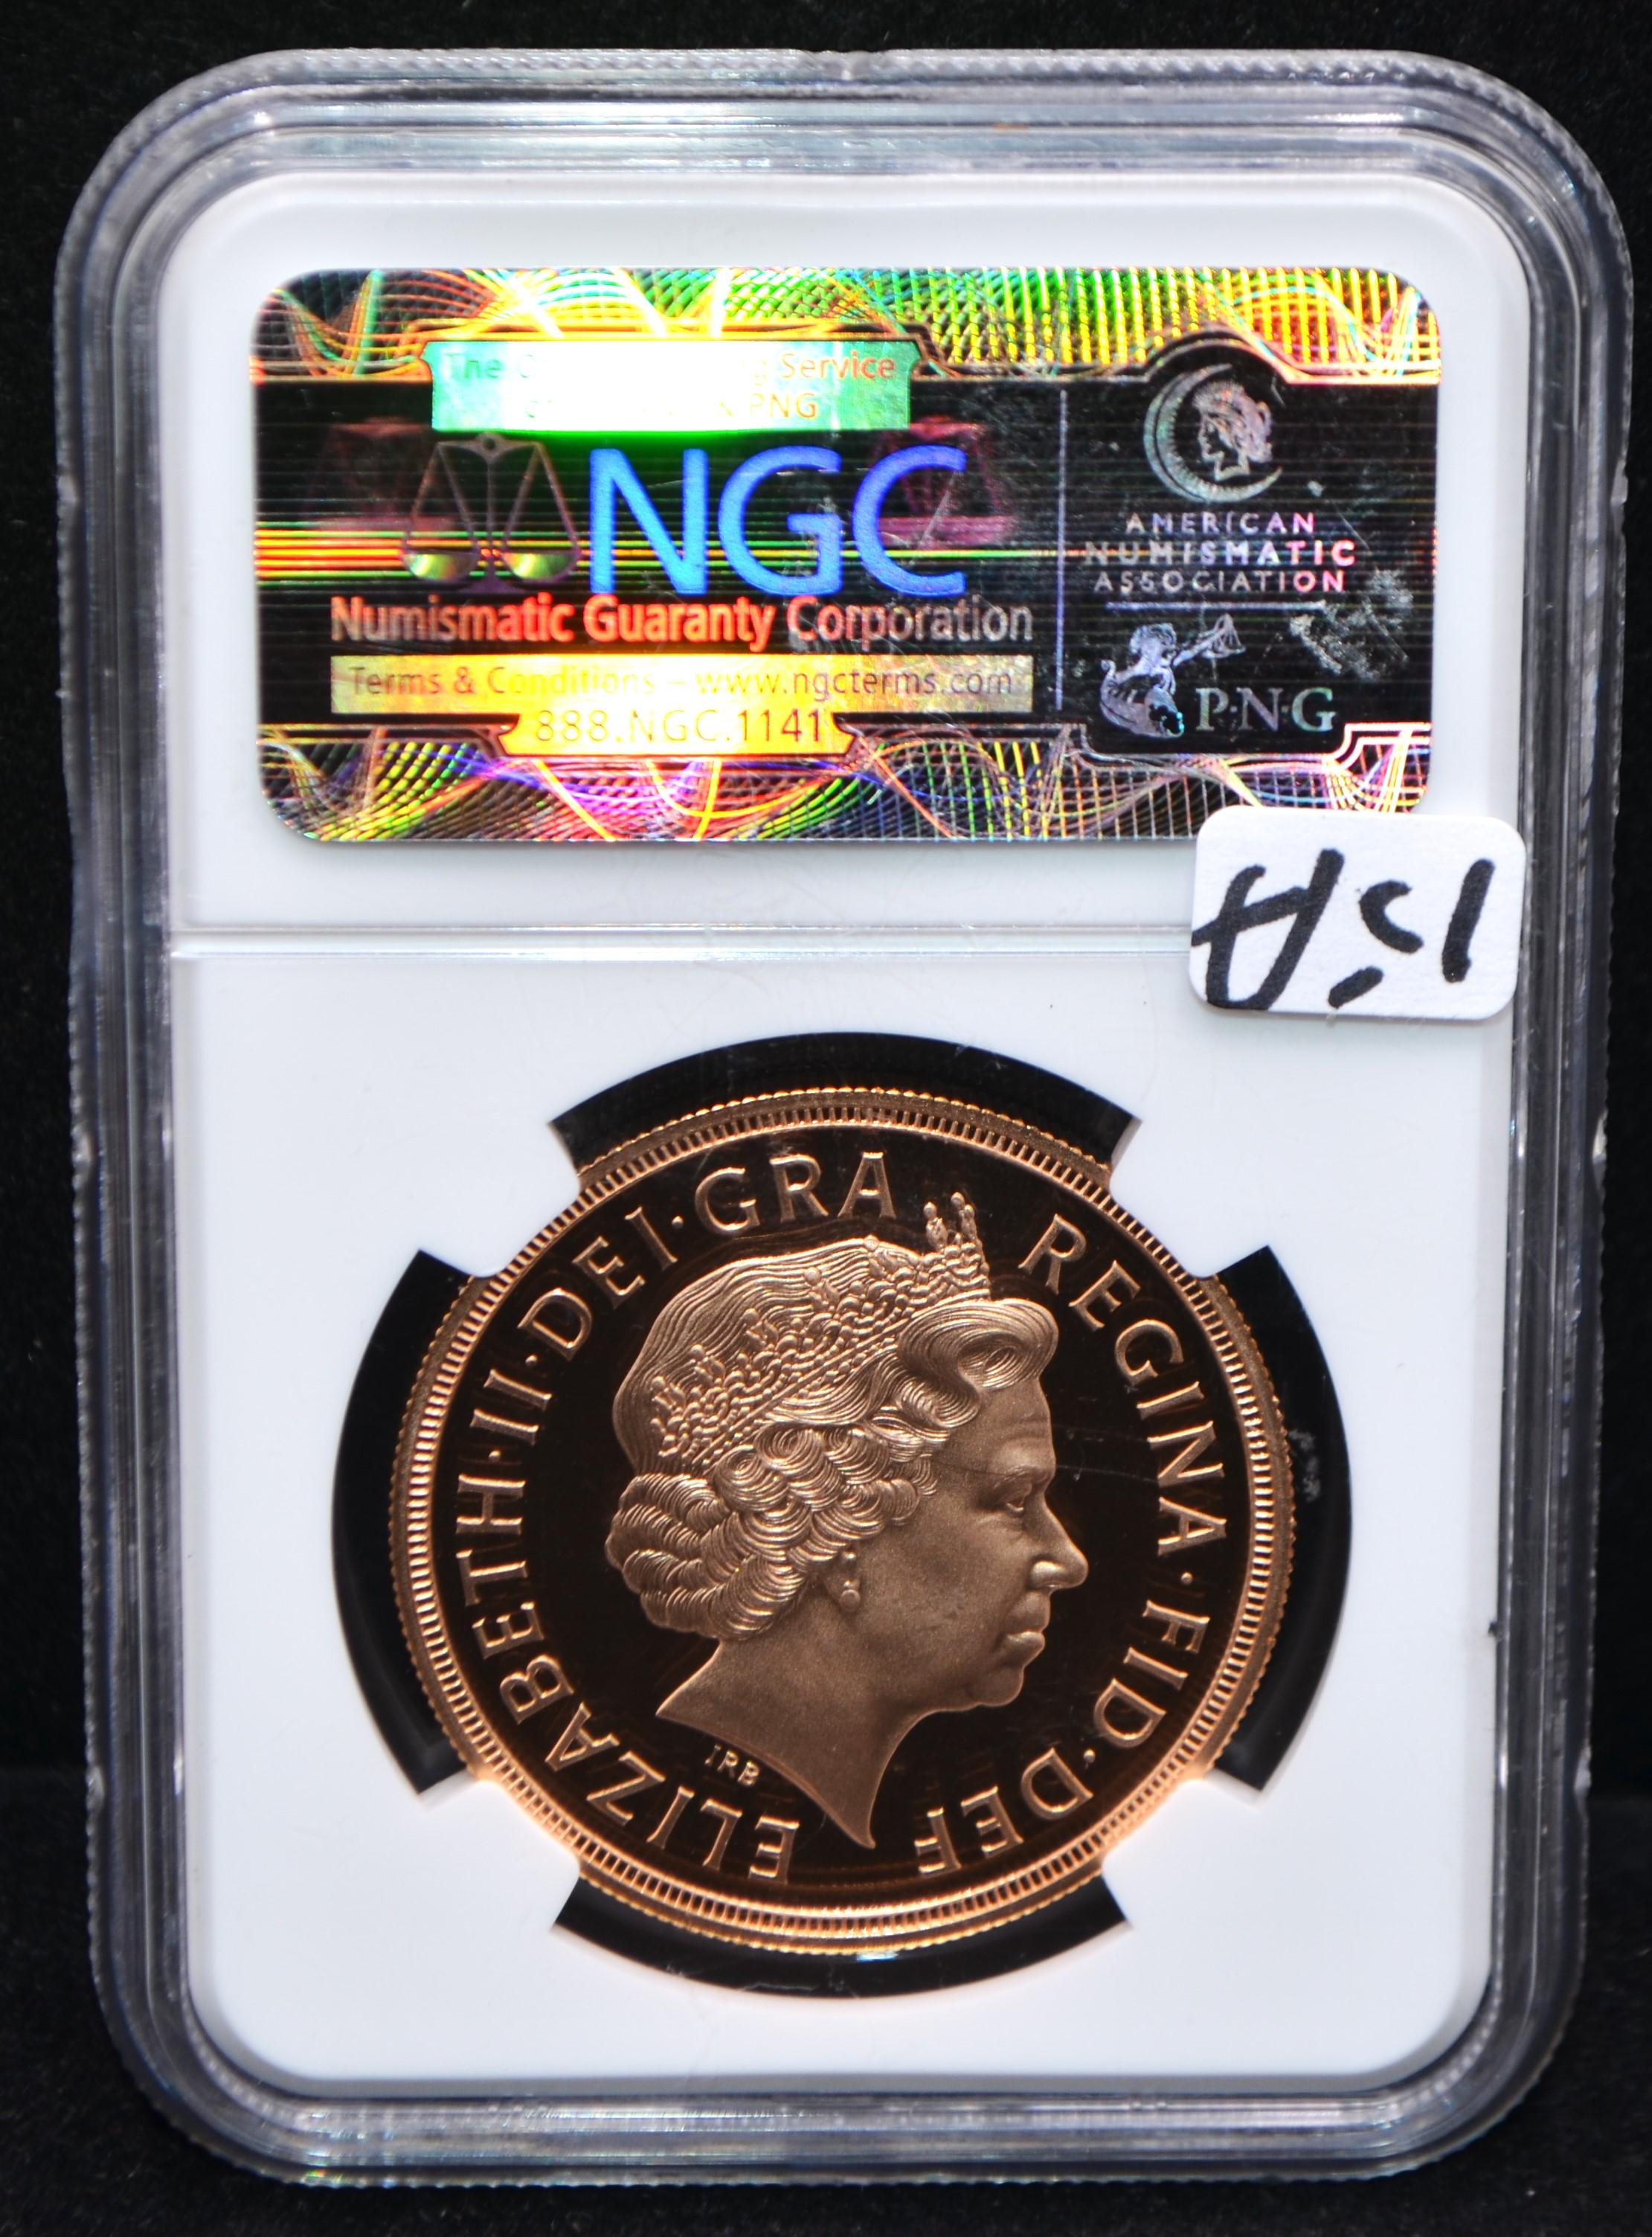 2010 G. BRITAIN 5 SOVEREIGN GOLD COIN - NGC PF70UC